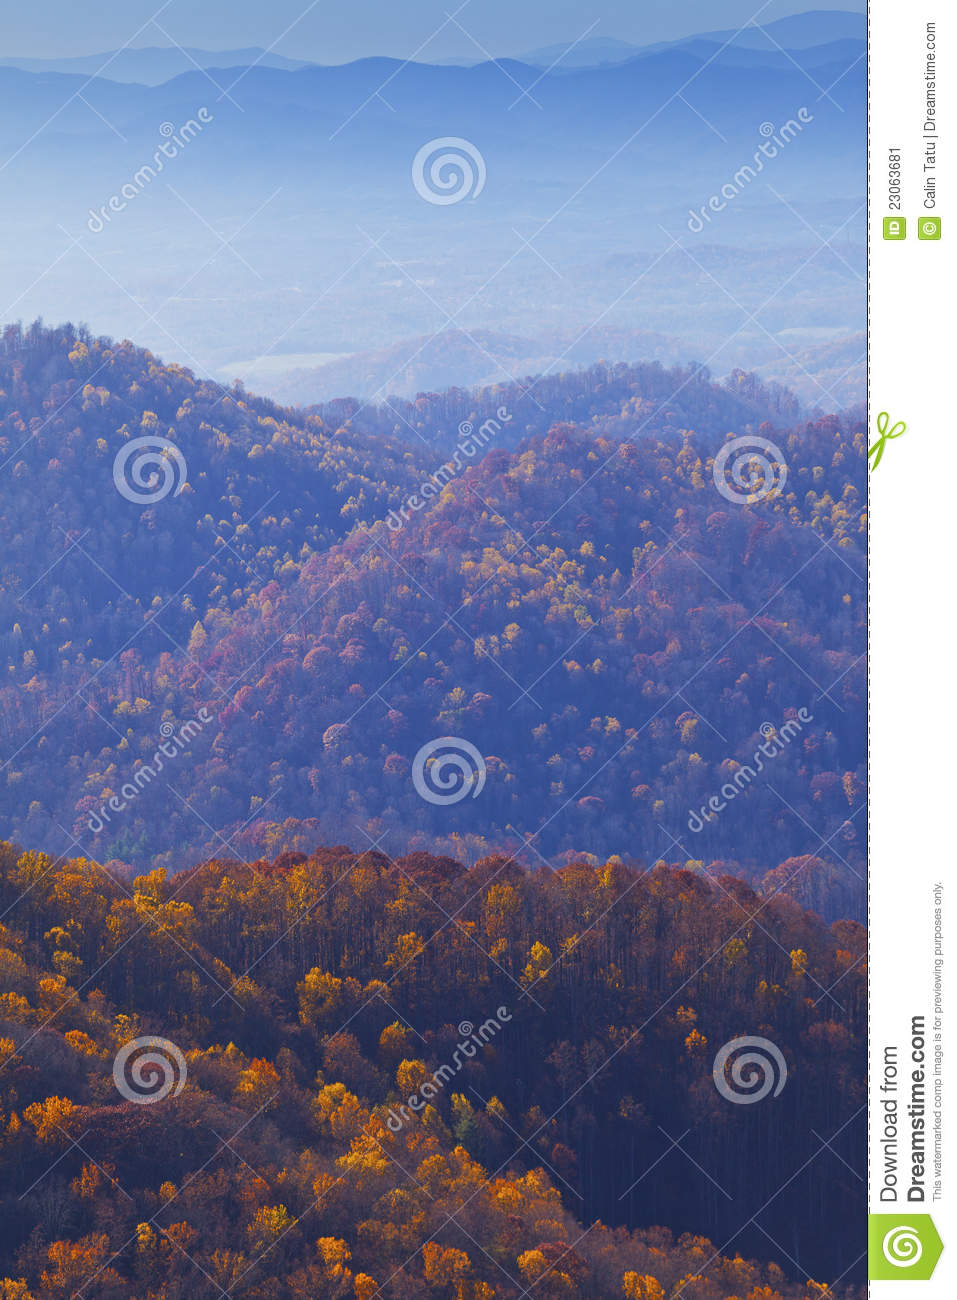 Appalachian Mountains At Sunset And Blue Mist Stock Image   Image